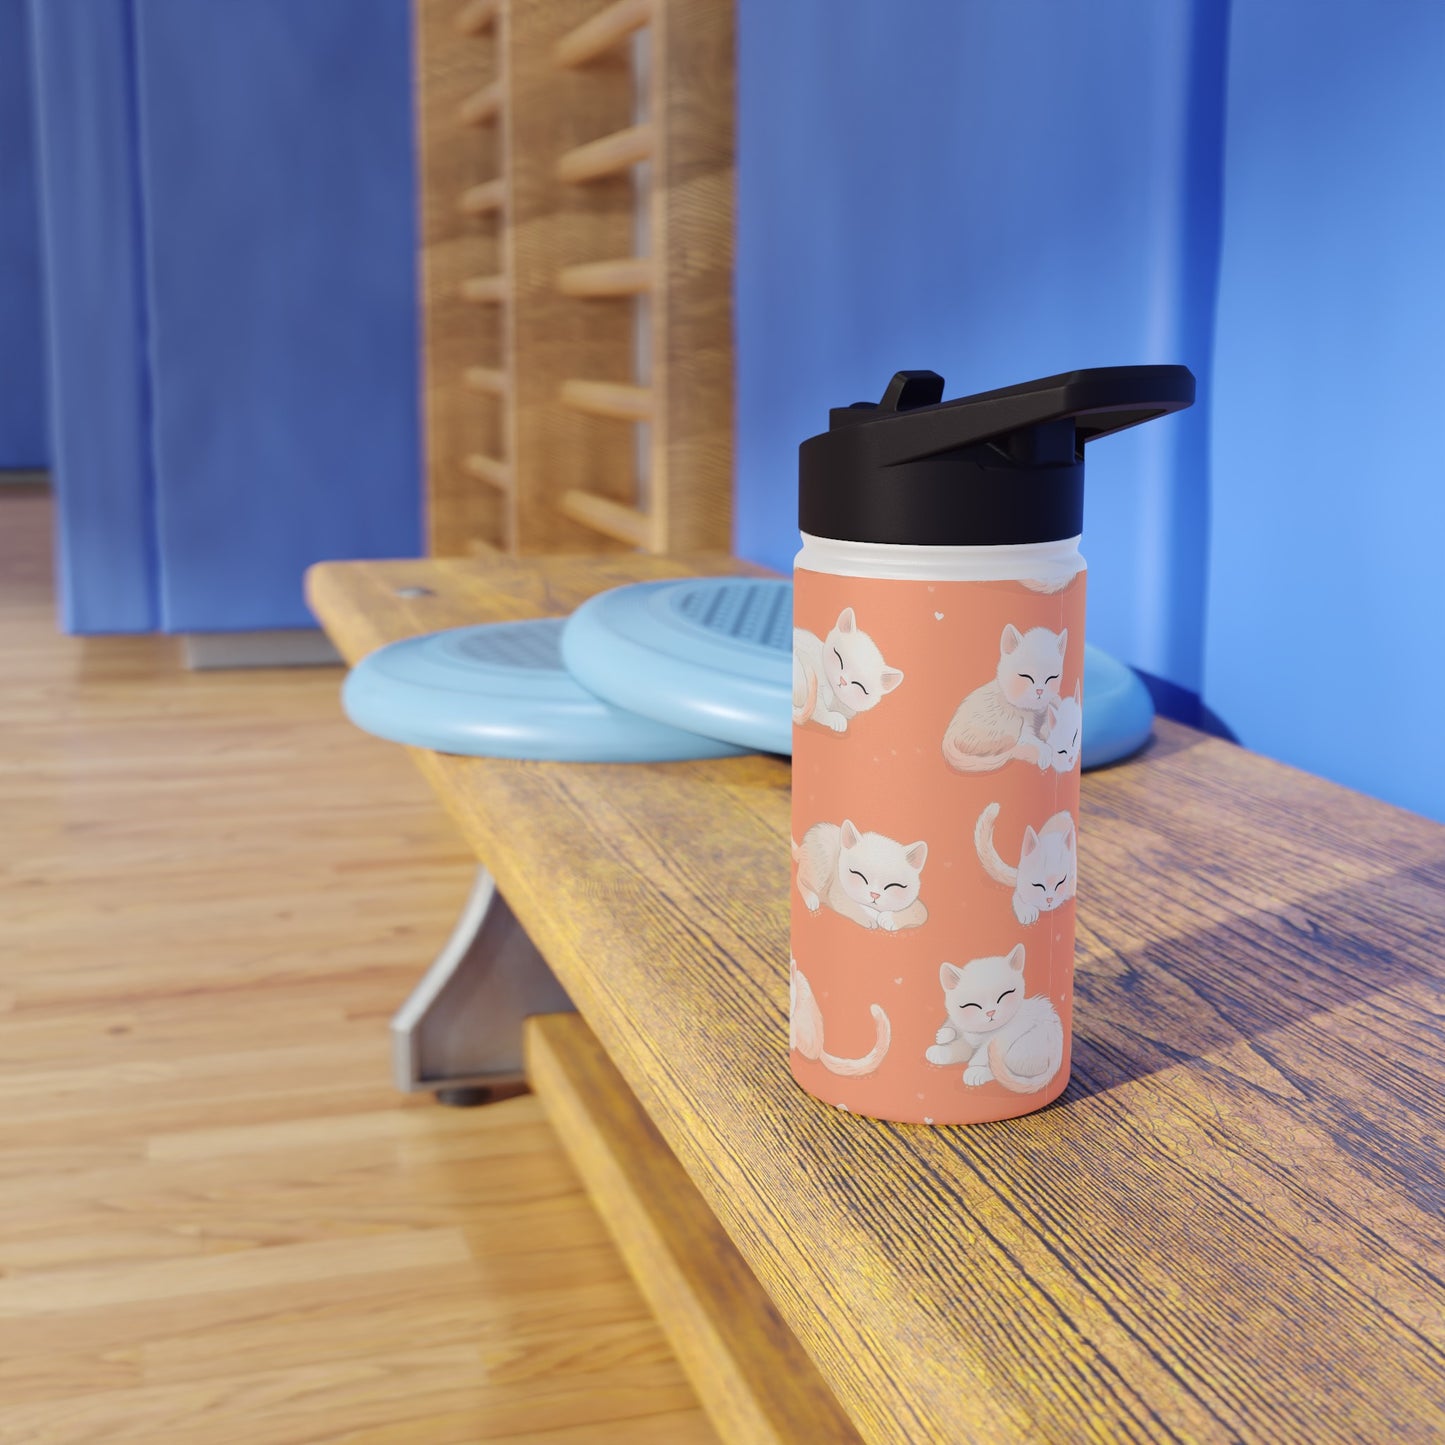 Insulated Water Bottle, 12oz, Cute Kittens - Double Walled Stainless Steel Thermos, Keeps Drinks Hot or Cold